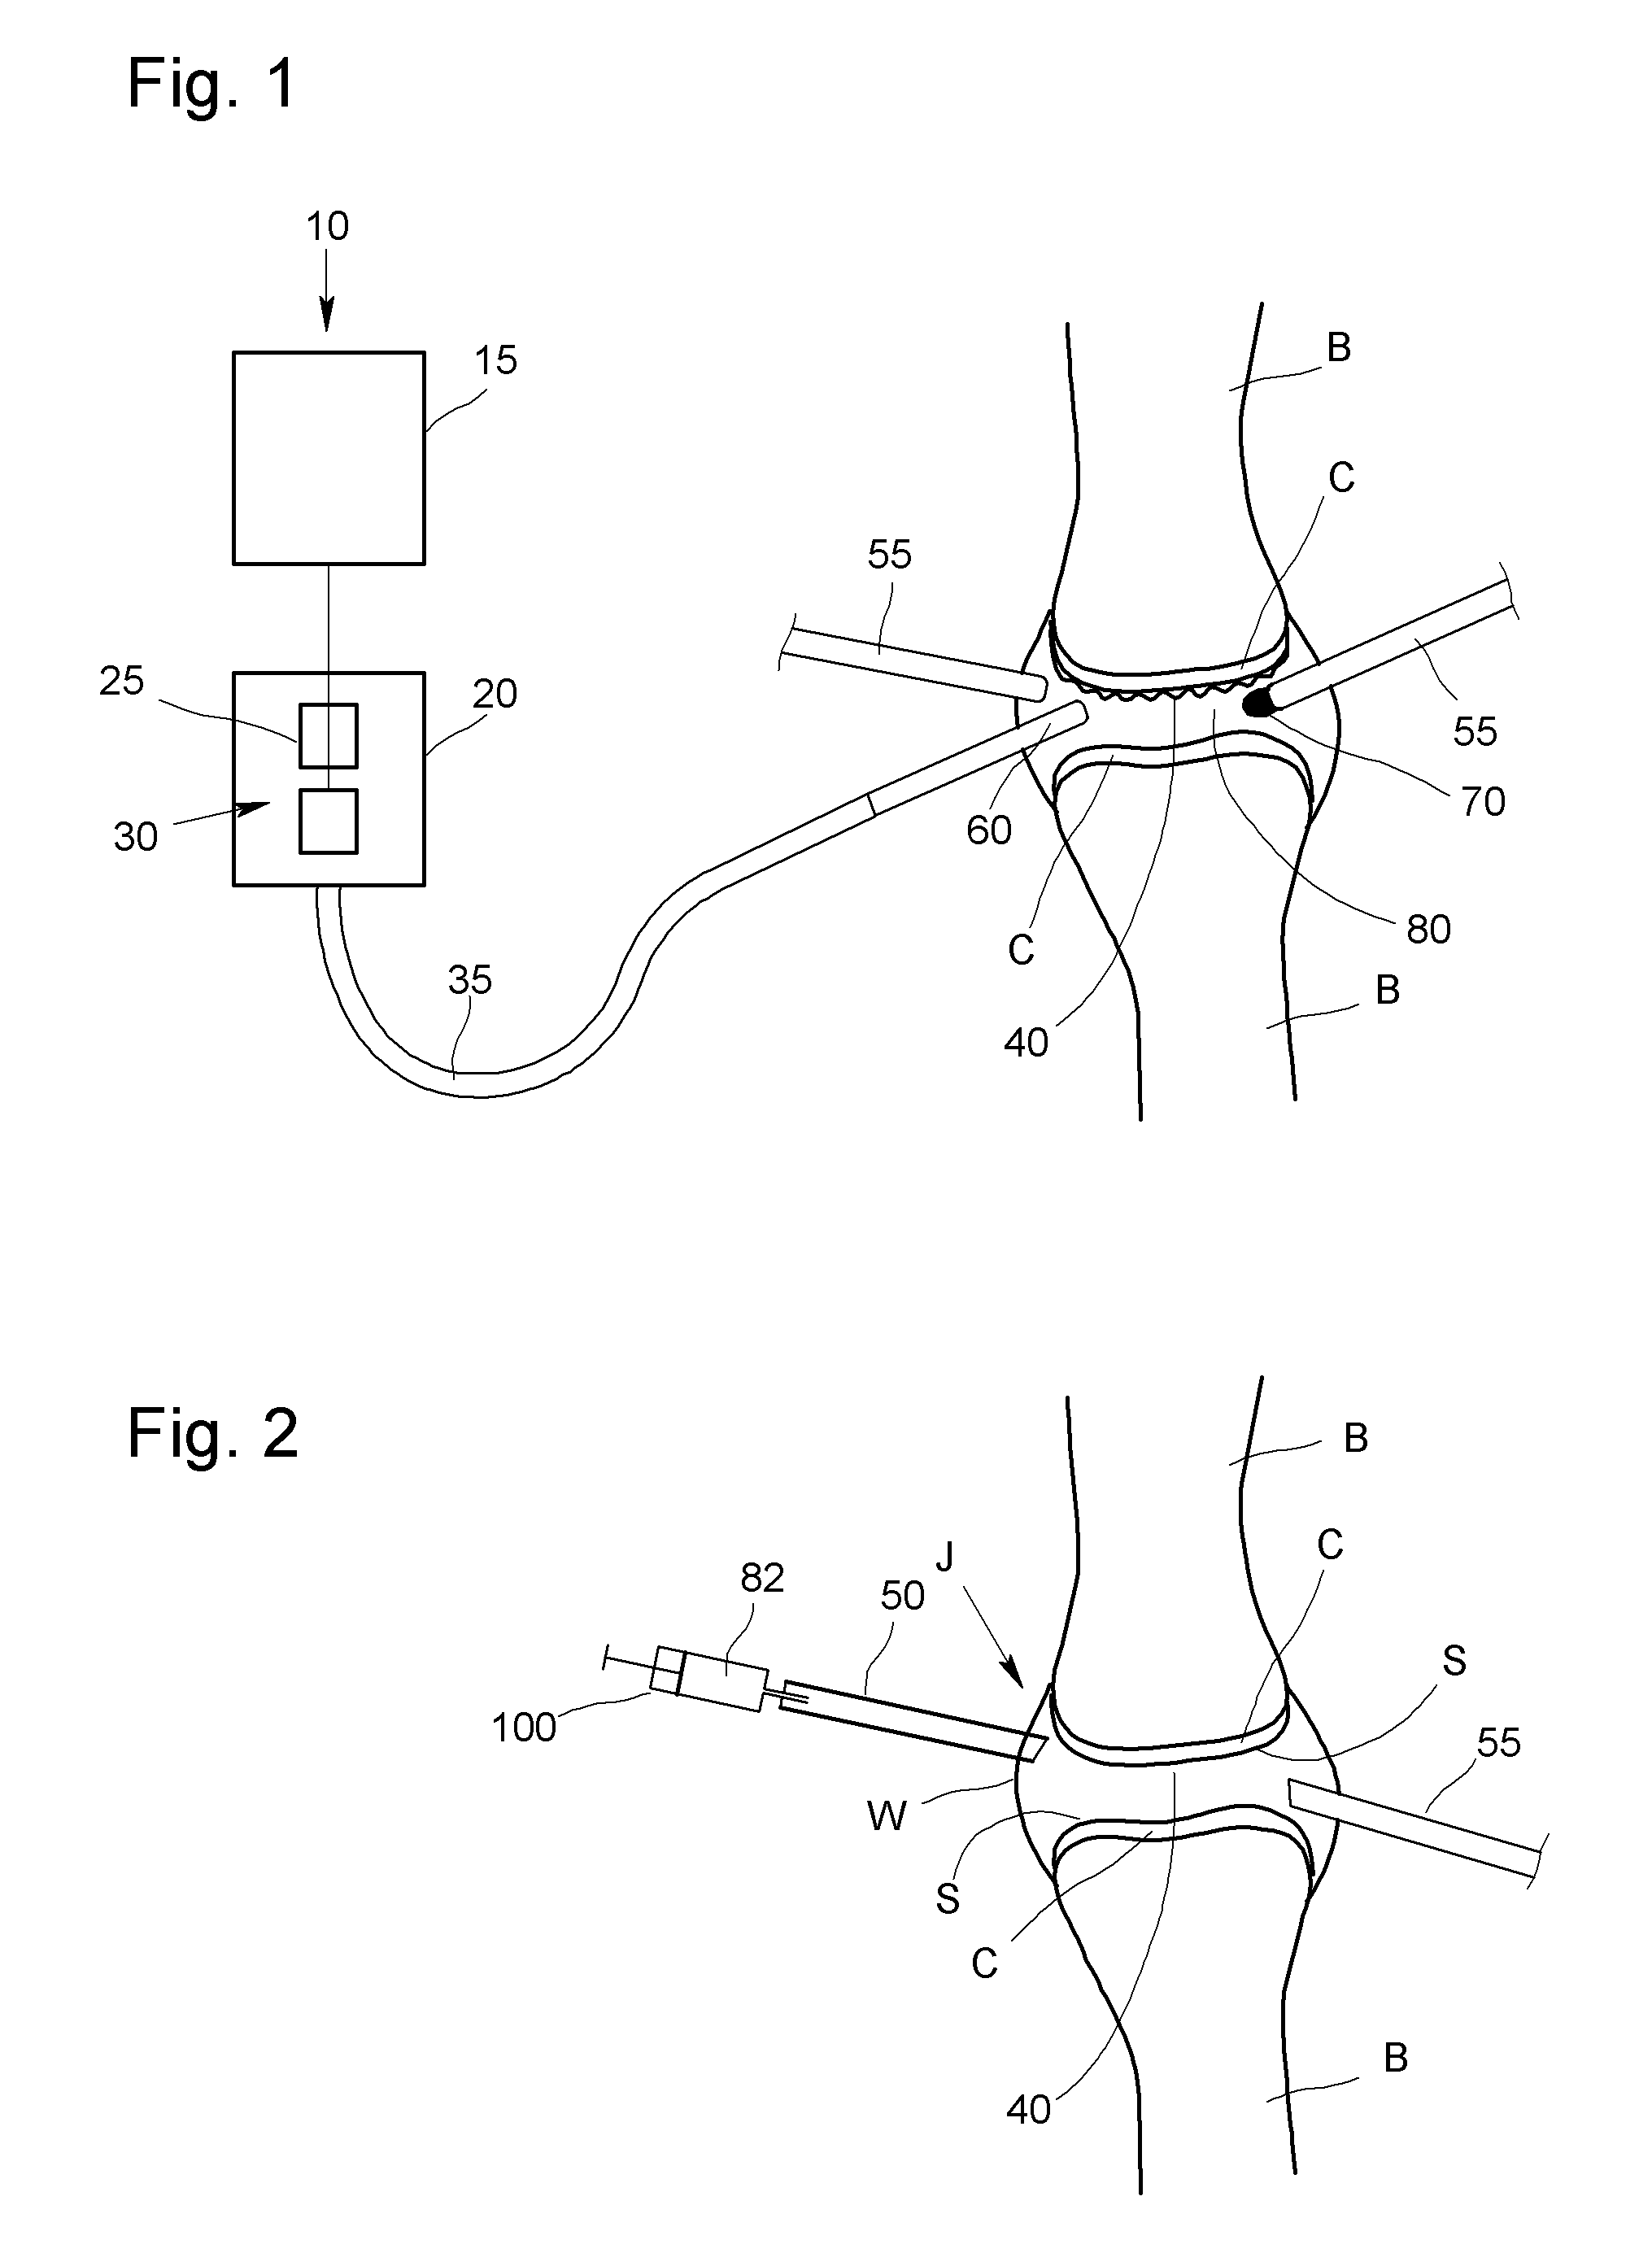 Method for the ablation of cartilage tissue in a knee joint using indocyanine